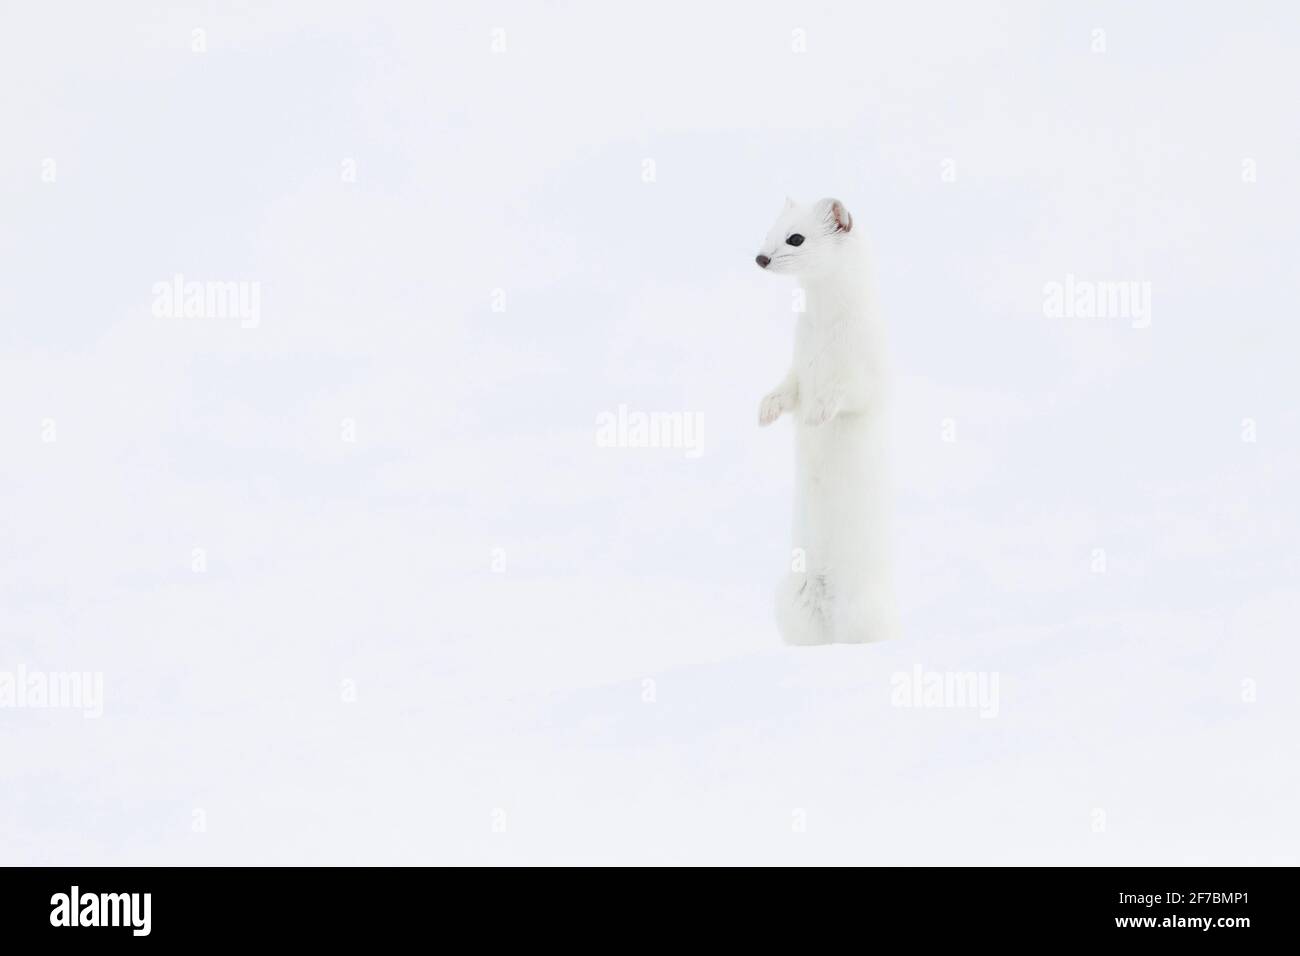 Ermine, Stoat, Short-tailed weasel (Mustela erminea), with winter fur stands erect in snow, Switzerland Stock Photo